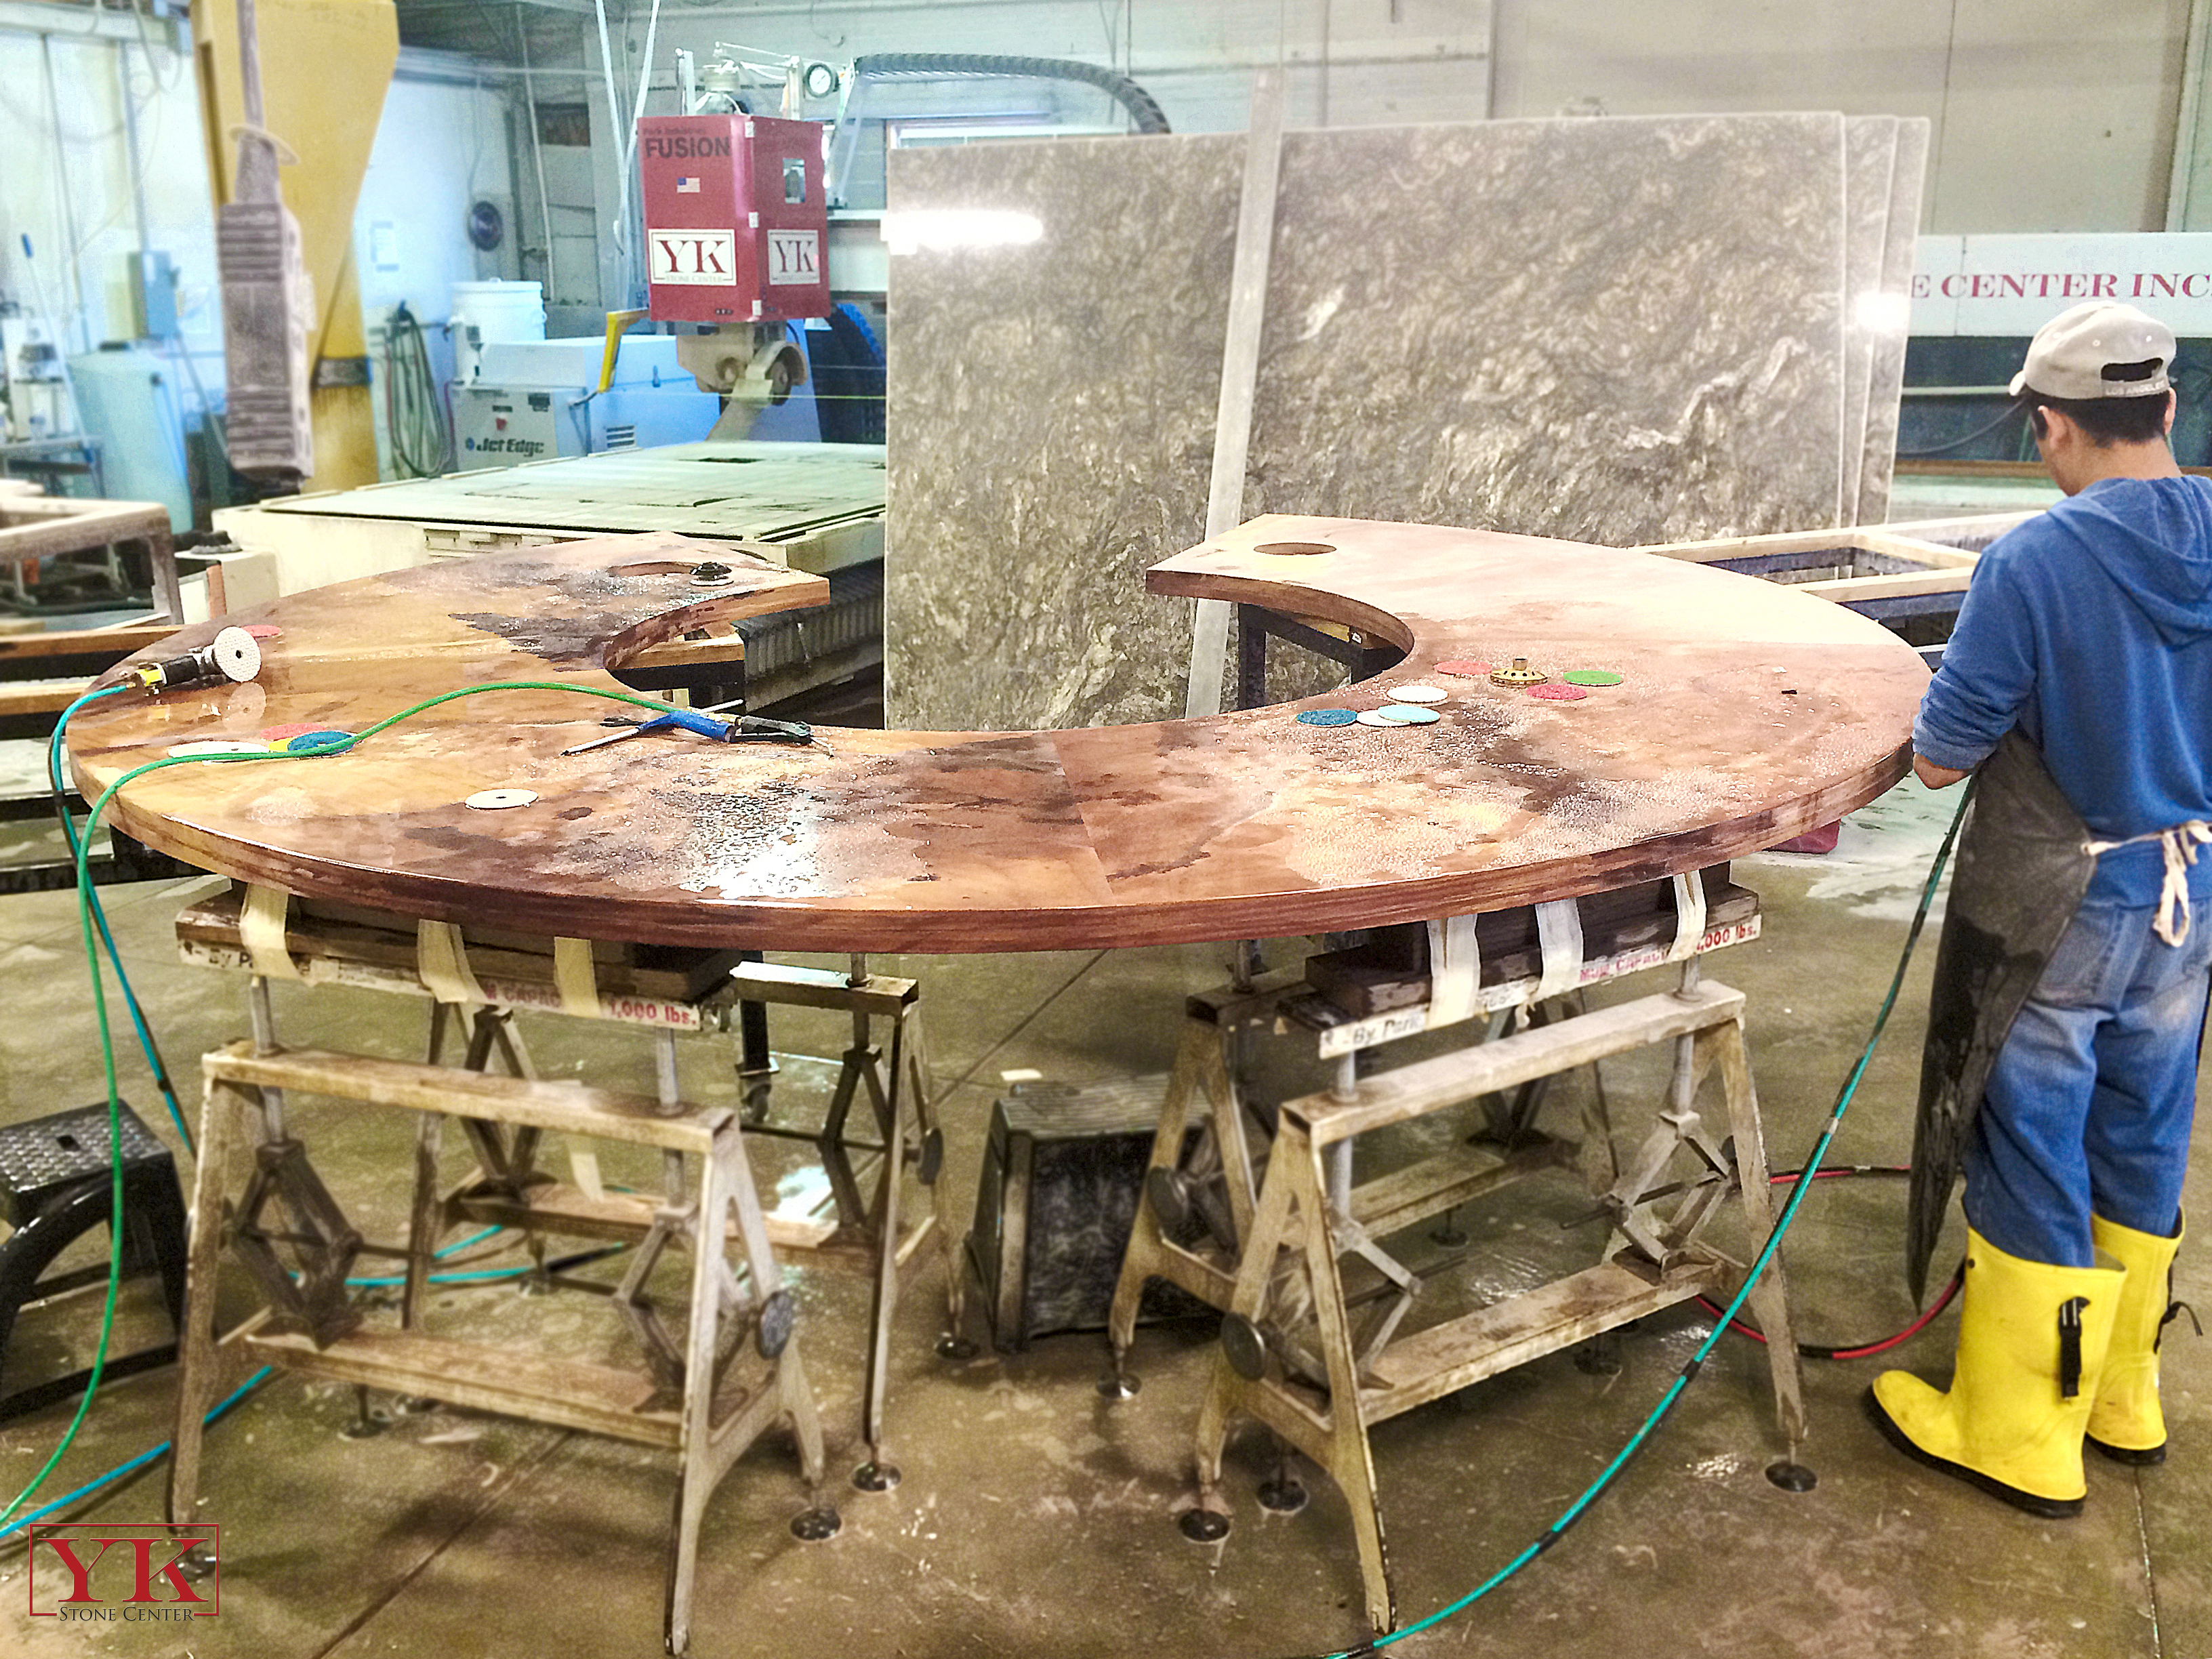 union station tables, fabrication for antero resources in denver colorado, yk stone center fabrication shop denver, co